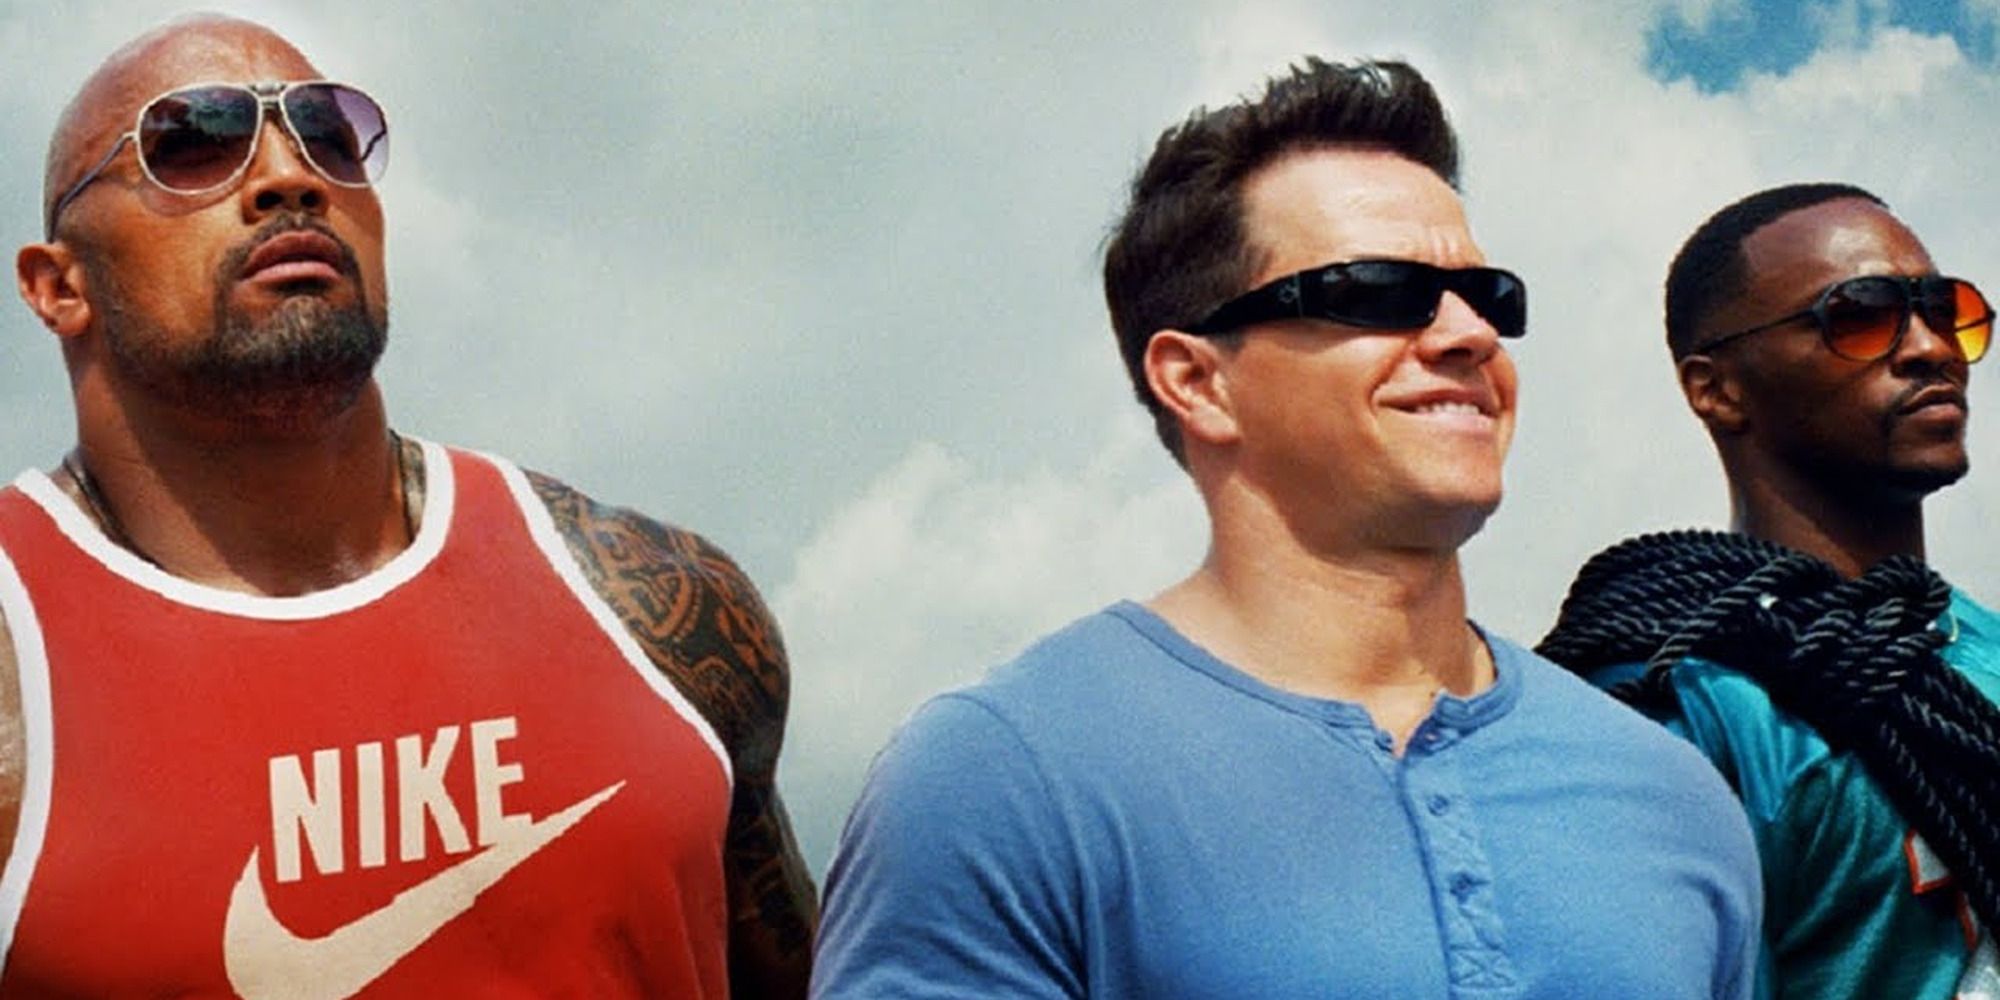 Dwayne Johnson, Mark Wahlberg, and Anthony Mackie as Paul, Daniel, and Adrian looking to the distance in Pain & Gain